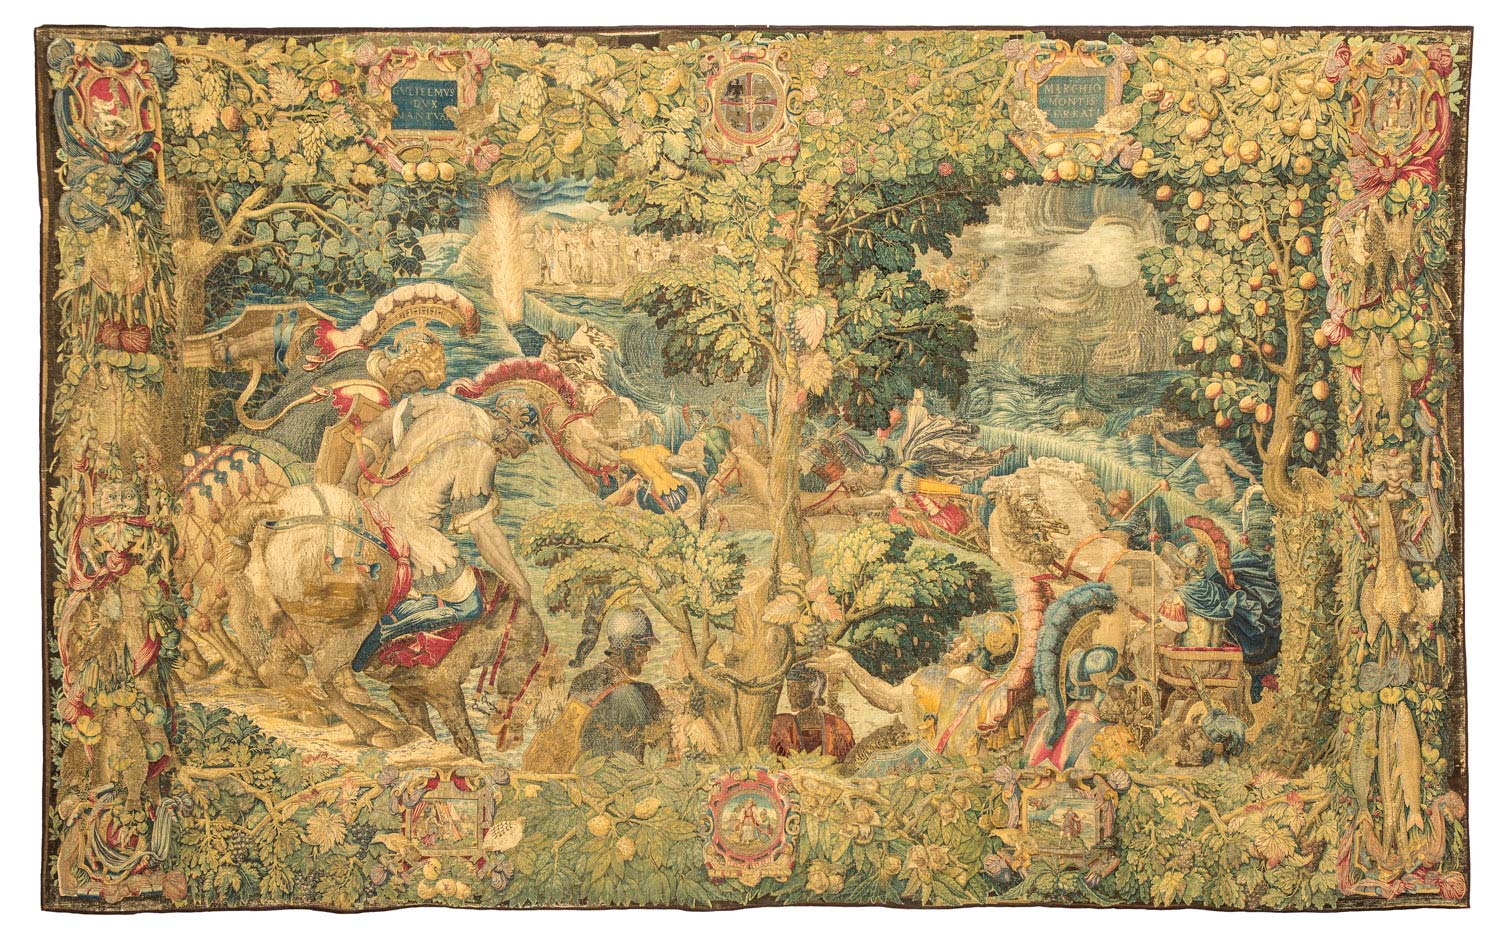 Milan, an exhibition on 18th-century drawings reproducing the Gonzaga Tapestries of the Duomo